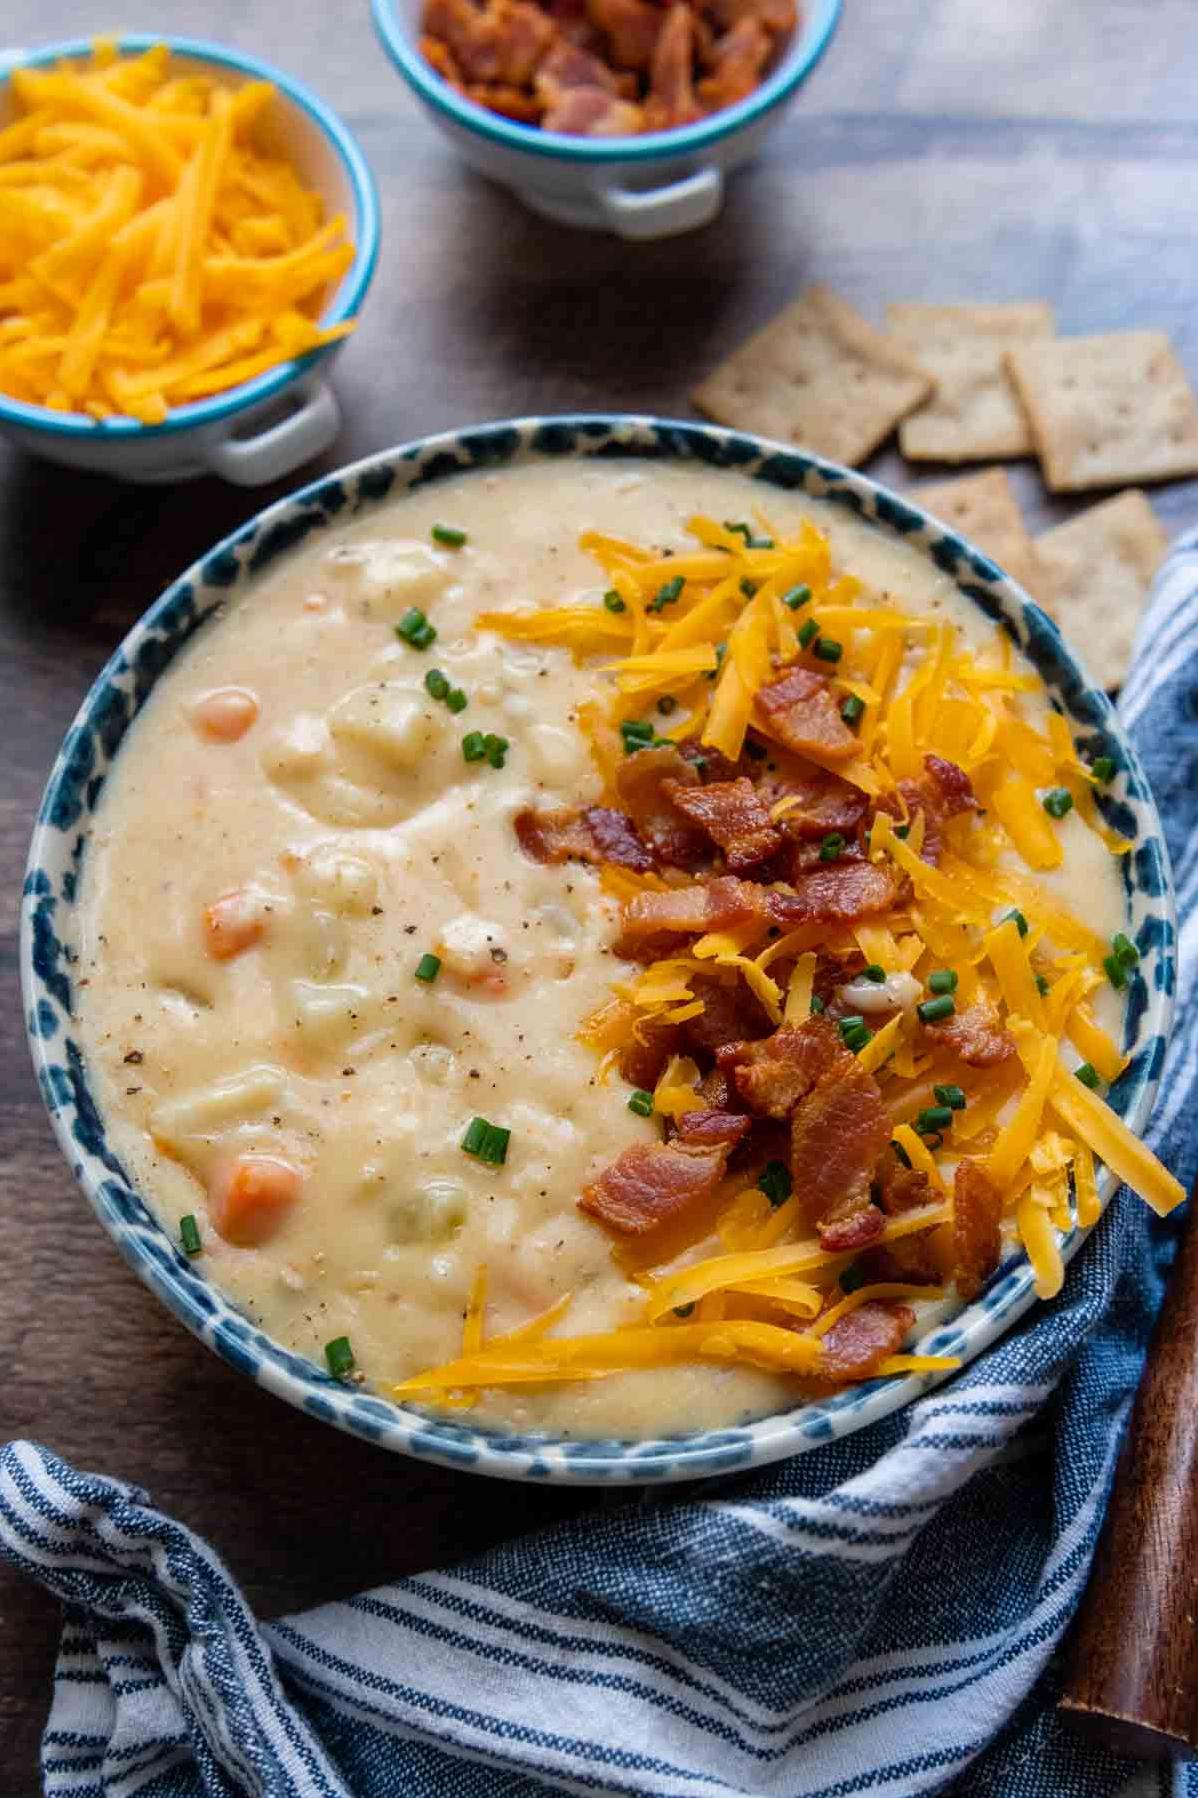  With crispy bacon and melted cheese, this soup is the ultimate comfort food.